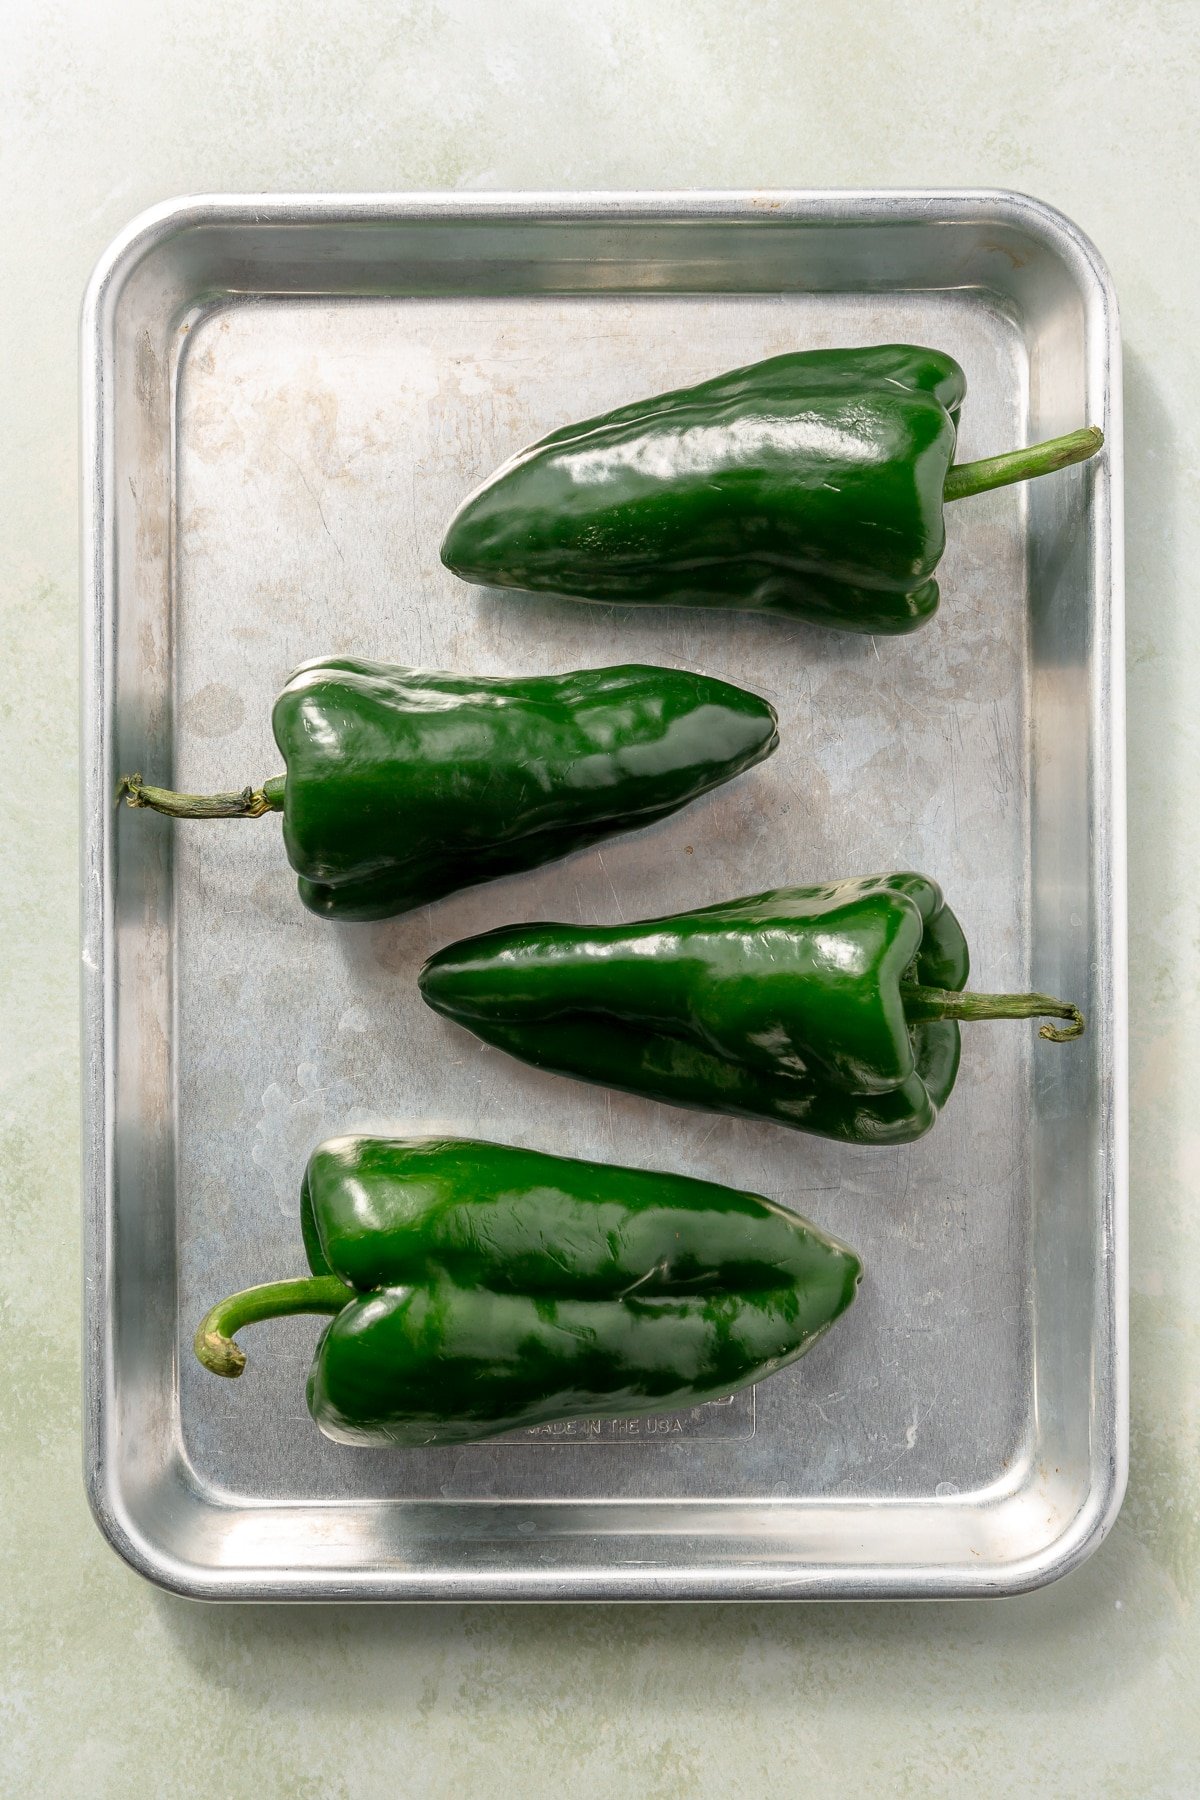 4 green peppers sit on a metal tray.